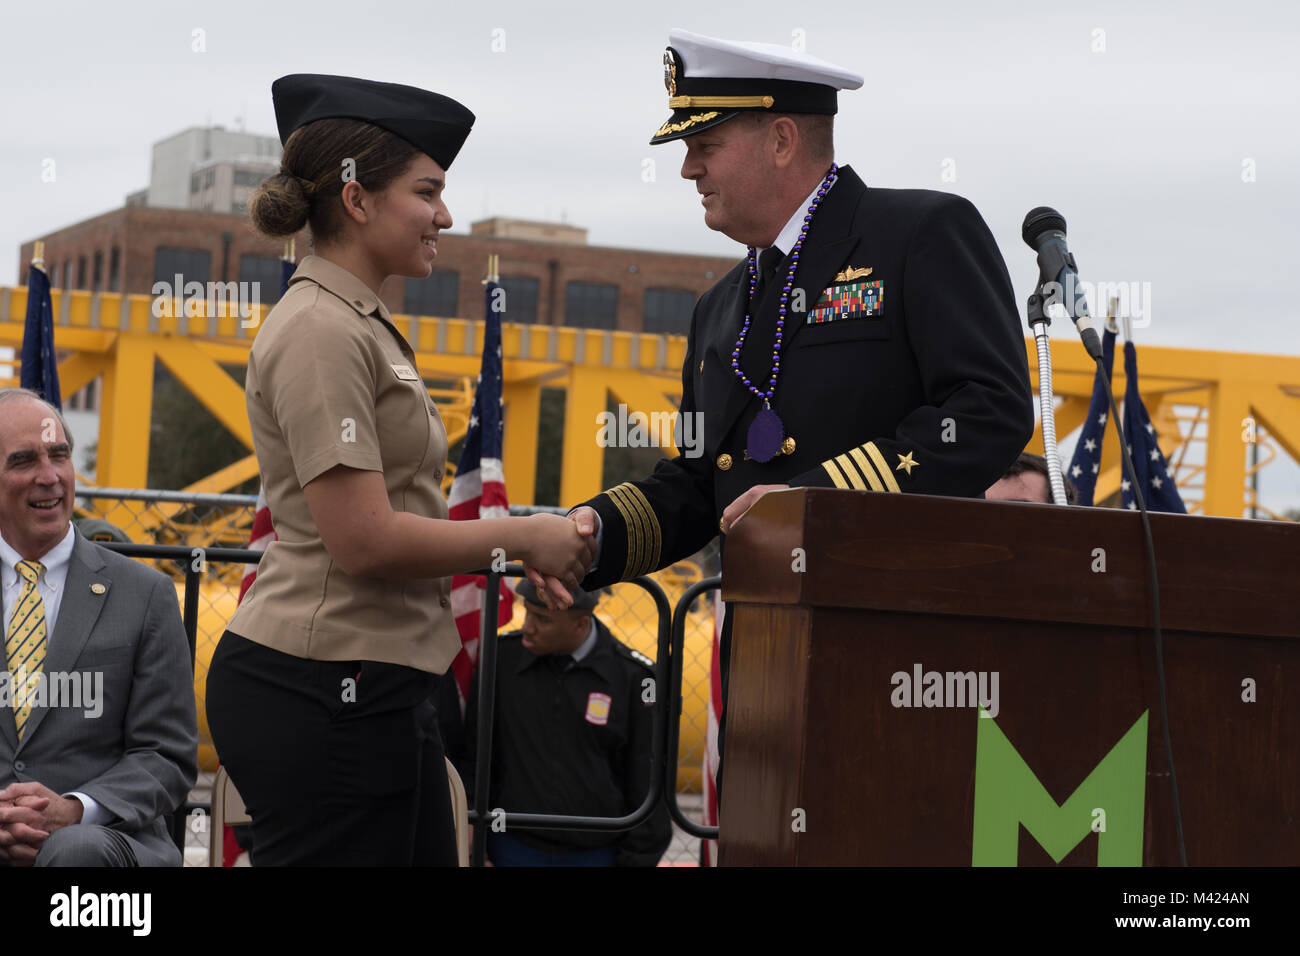 180209-N-FA806-109 MOBILE, Ala (Feb. 9, 2018) Capt. Peter K. Nilsen, commanding officer of the guided-missile cruiser USS Philippine Sea (CG 58),  hands Navy Junior Reserve Officer Training Corps cadet Shaneylitza Martinez a challenge coin during a ceremony celebrating Philippine Sea's arrival in Mobile, Ala. The ship is participating in Mardi Gras celebrations during a scheduled port visit, which provides area residents an opportunity to learn about the Navy. (U.S. Navy photo by Mass Communication Specialist 3rd Class Roland John) Stock Photo